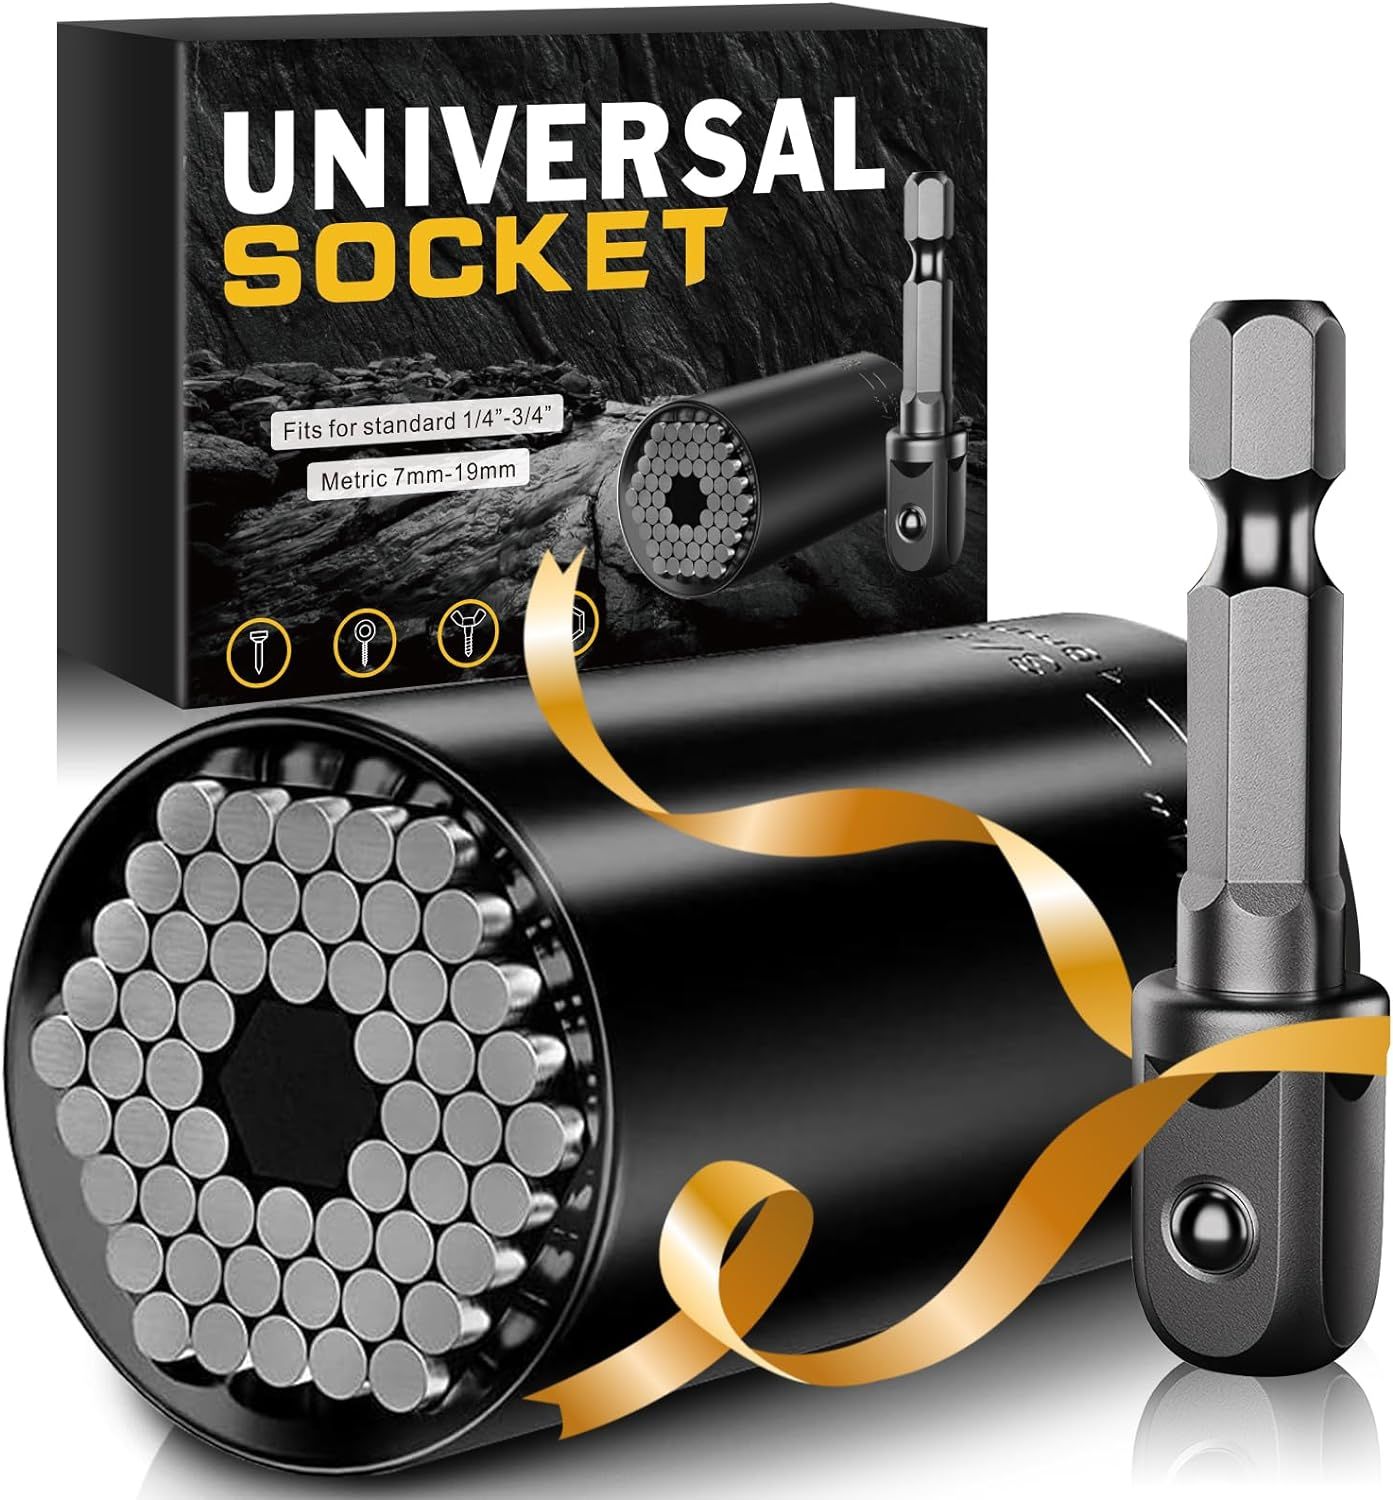 Super Universal Socket Tools Gifts for Men - Stocking Stuffers for Him Adults, Christmas/Birthday... | Amazon (US)